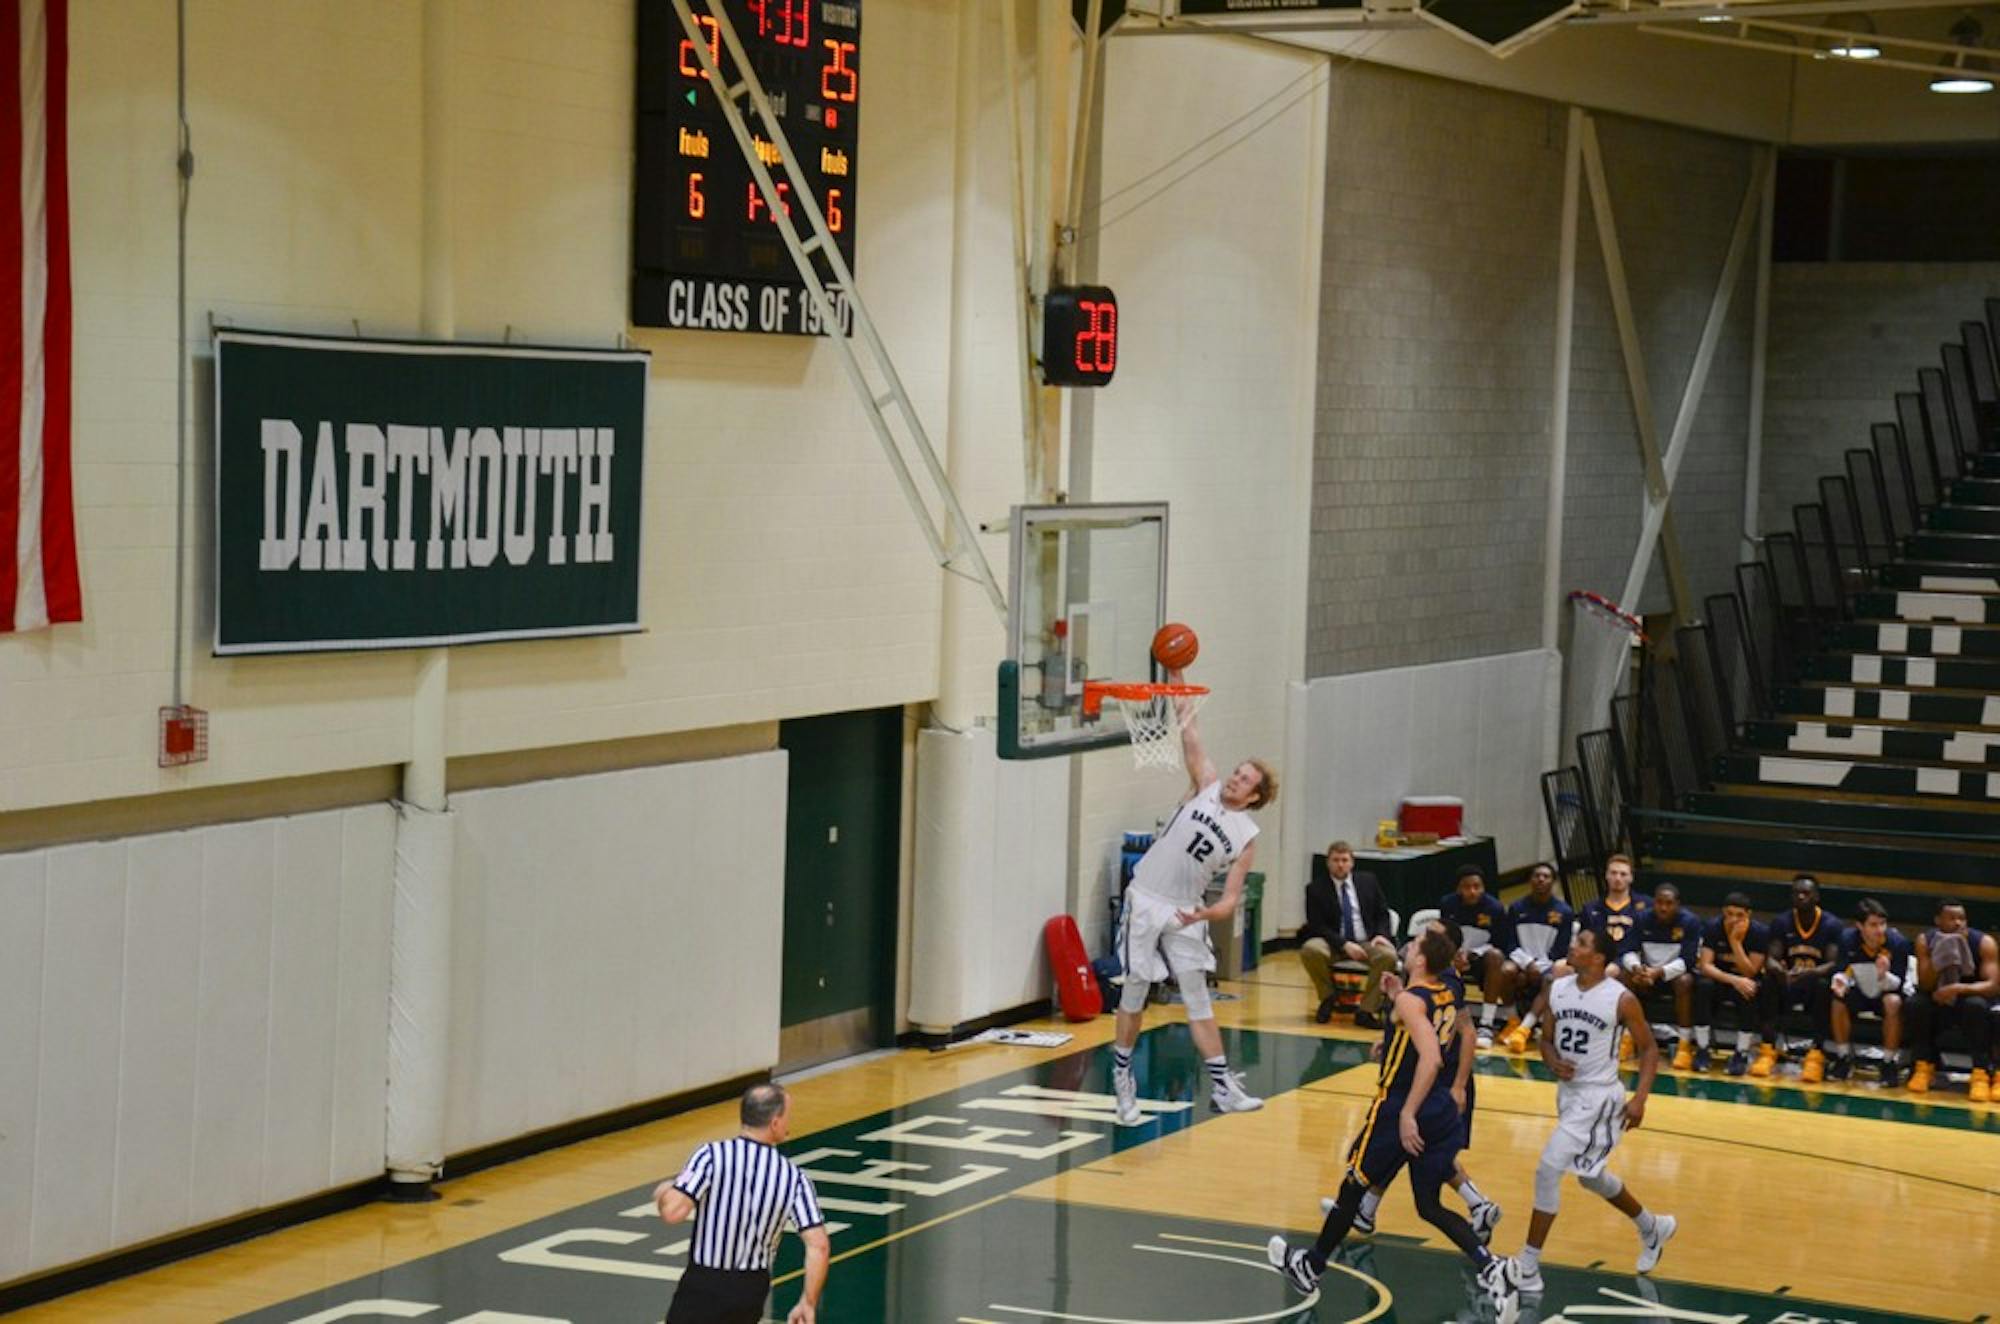 Dartmouth men's basketball played at home against Canisius Tuesday night